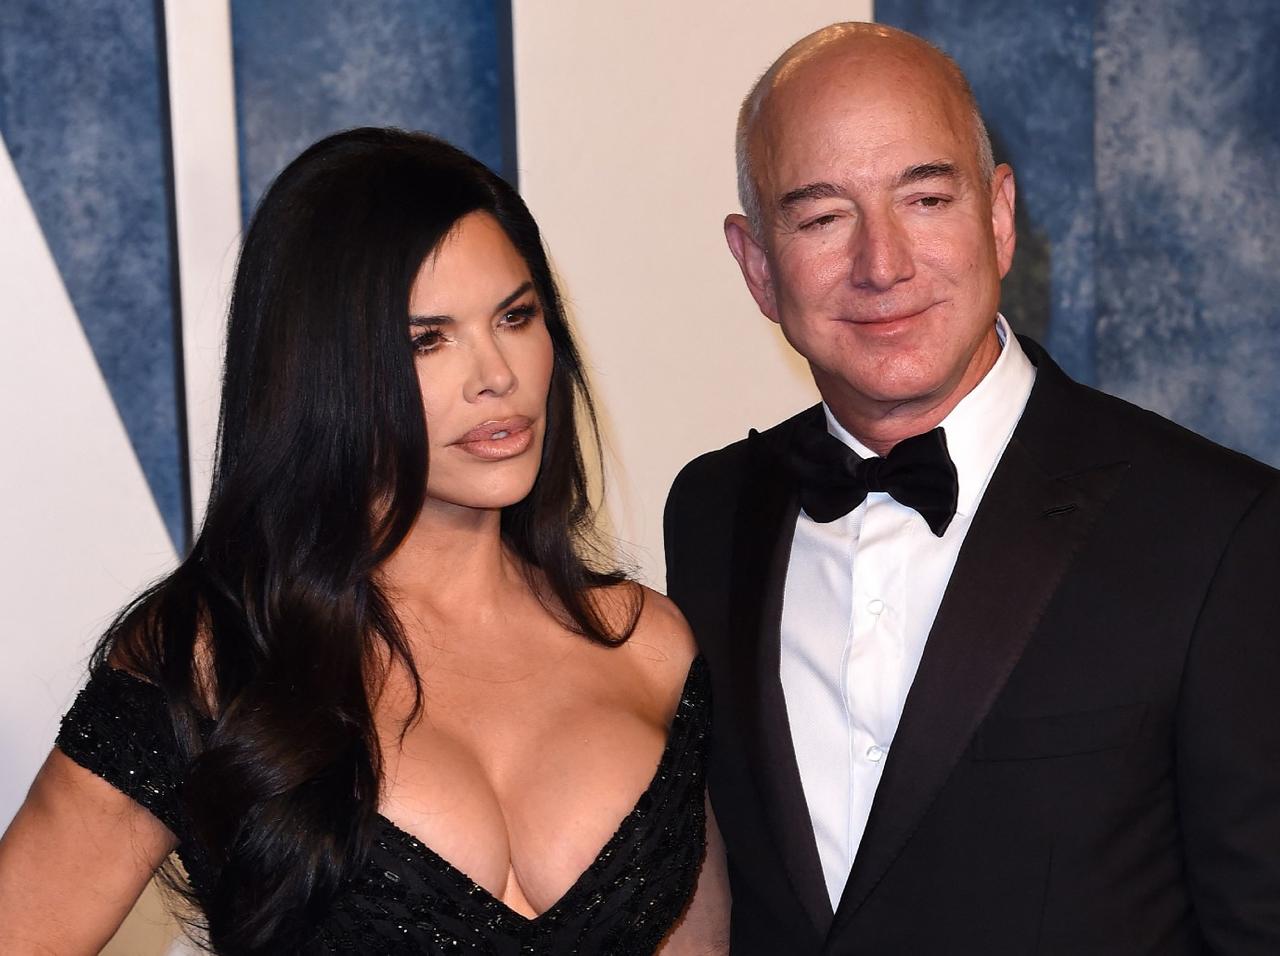 Jeff Bezos And Lauren Sanchez Engaged After 5 Years Of Dating Report 7784